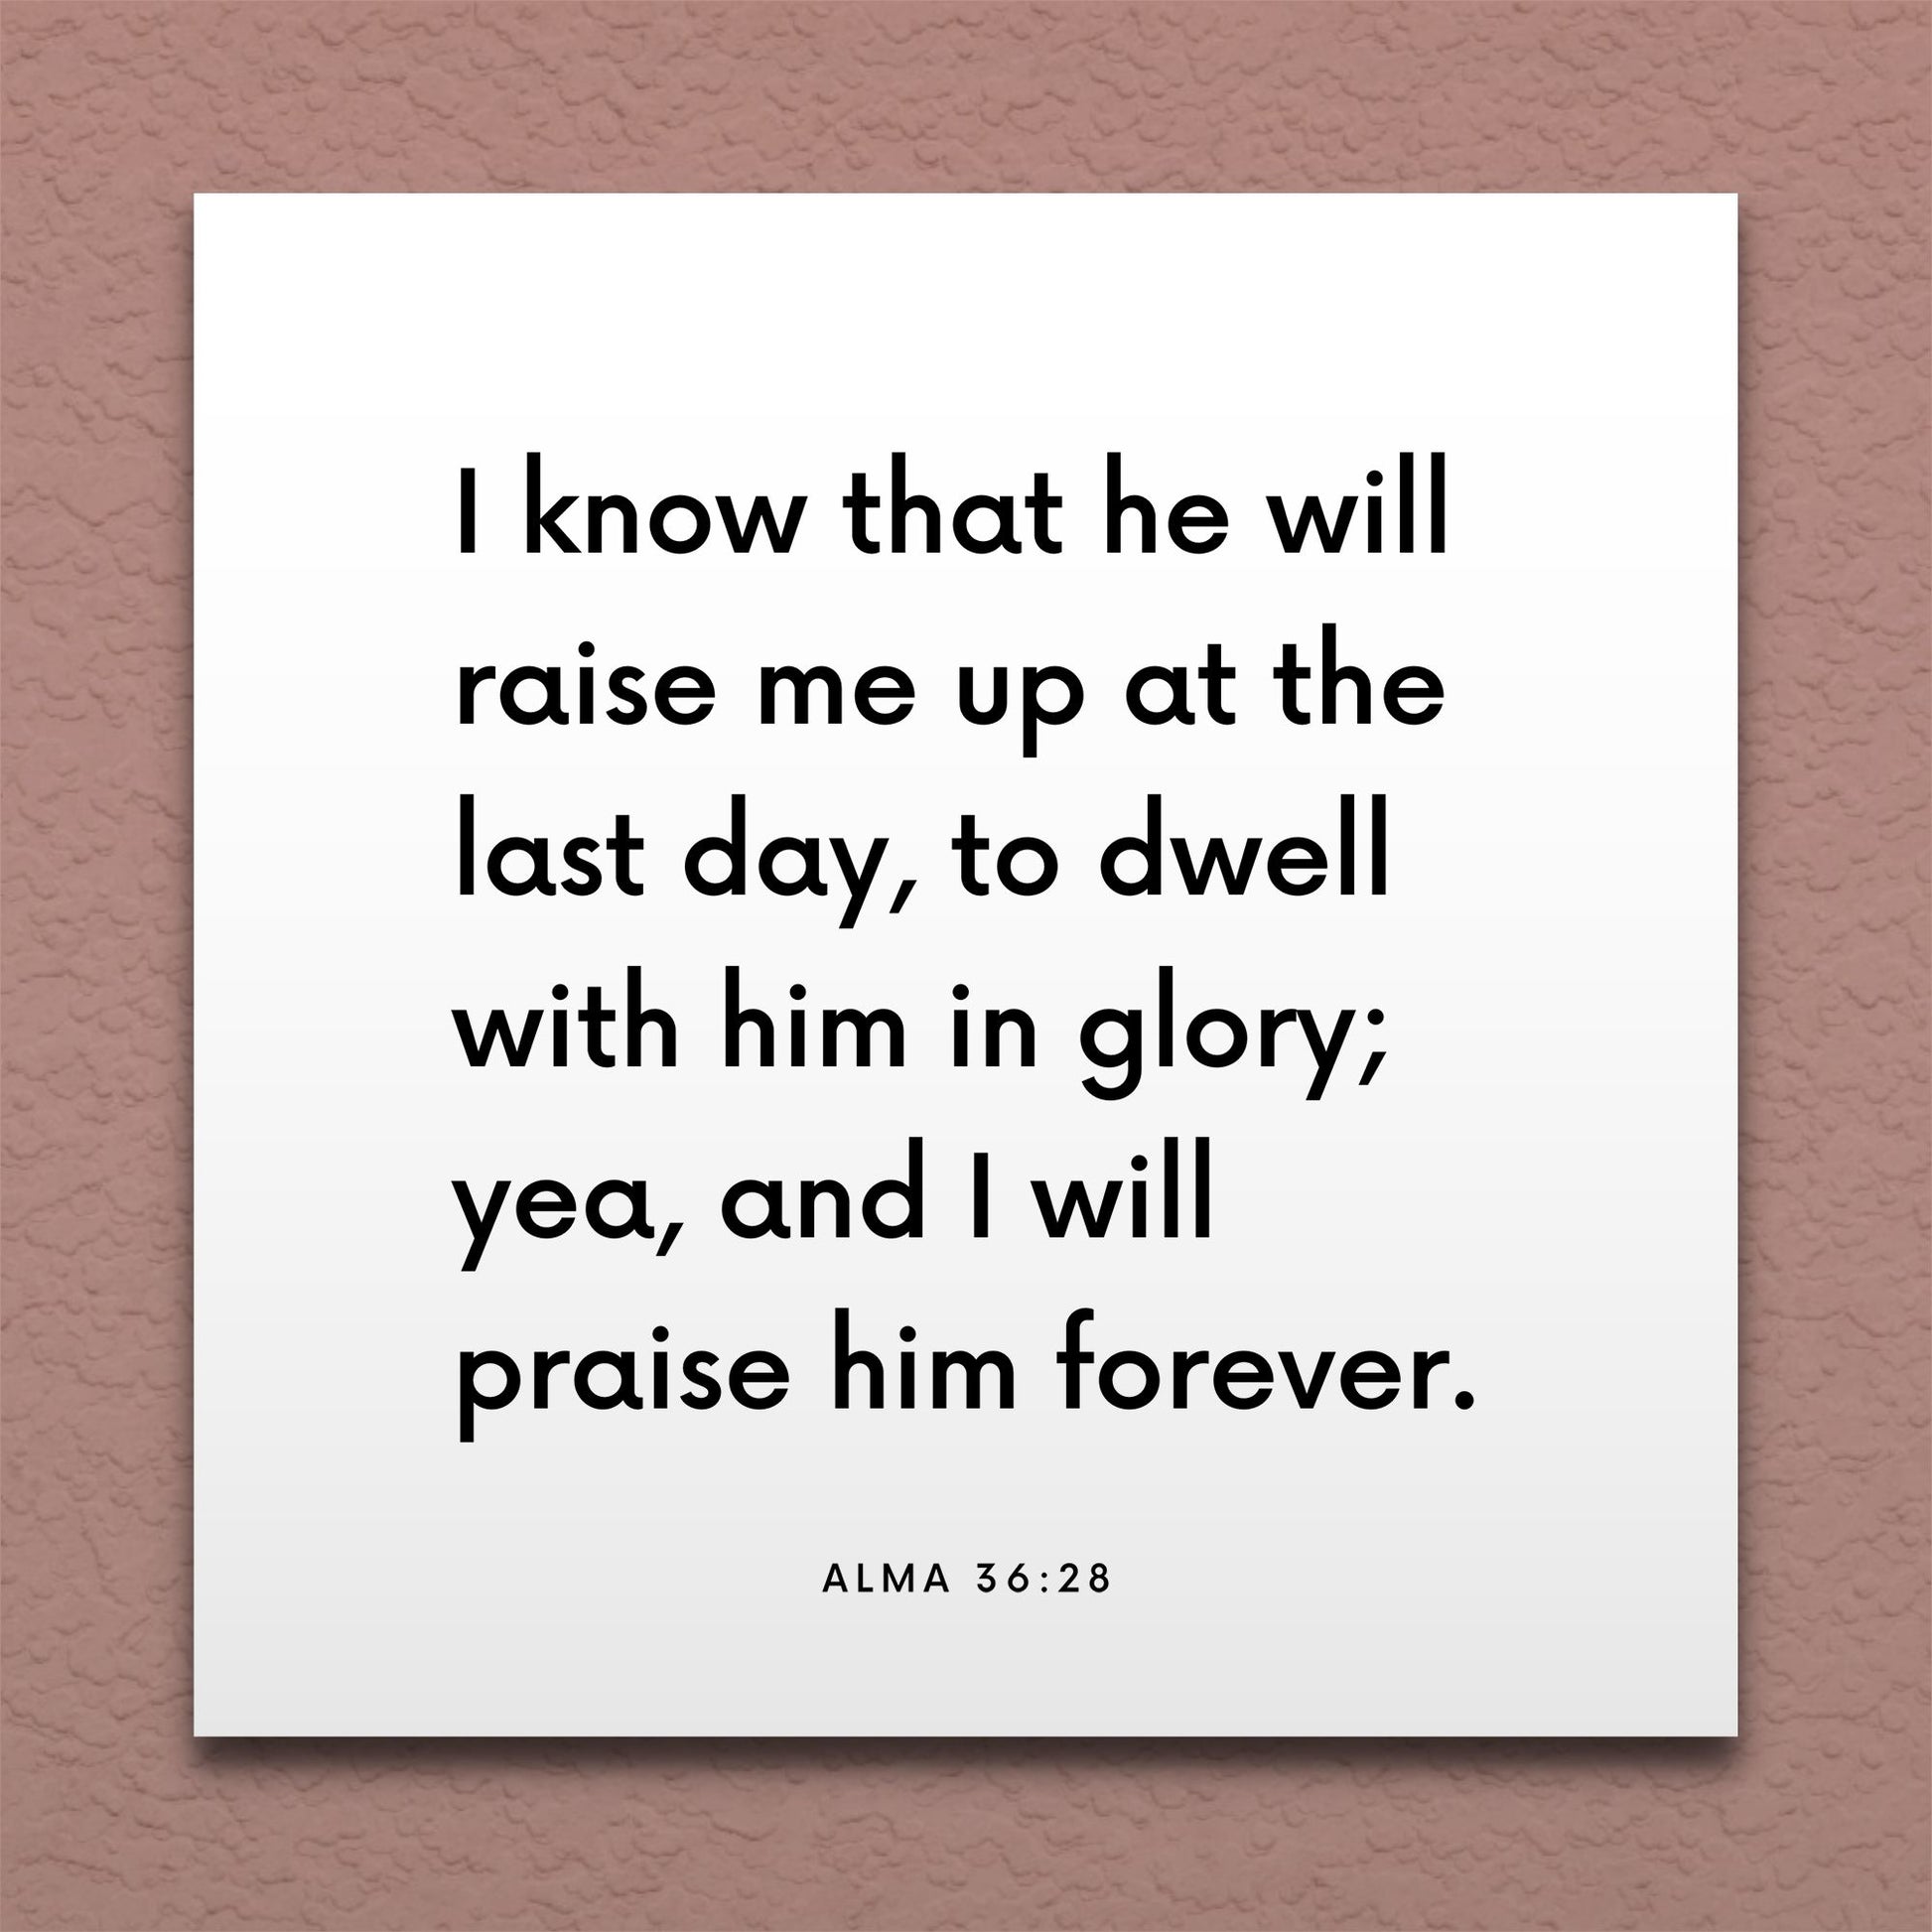 Wall-mounted scripture tile for Alma 36:28 - "I know that he will raise me up at the last day"